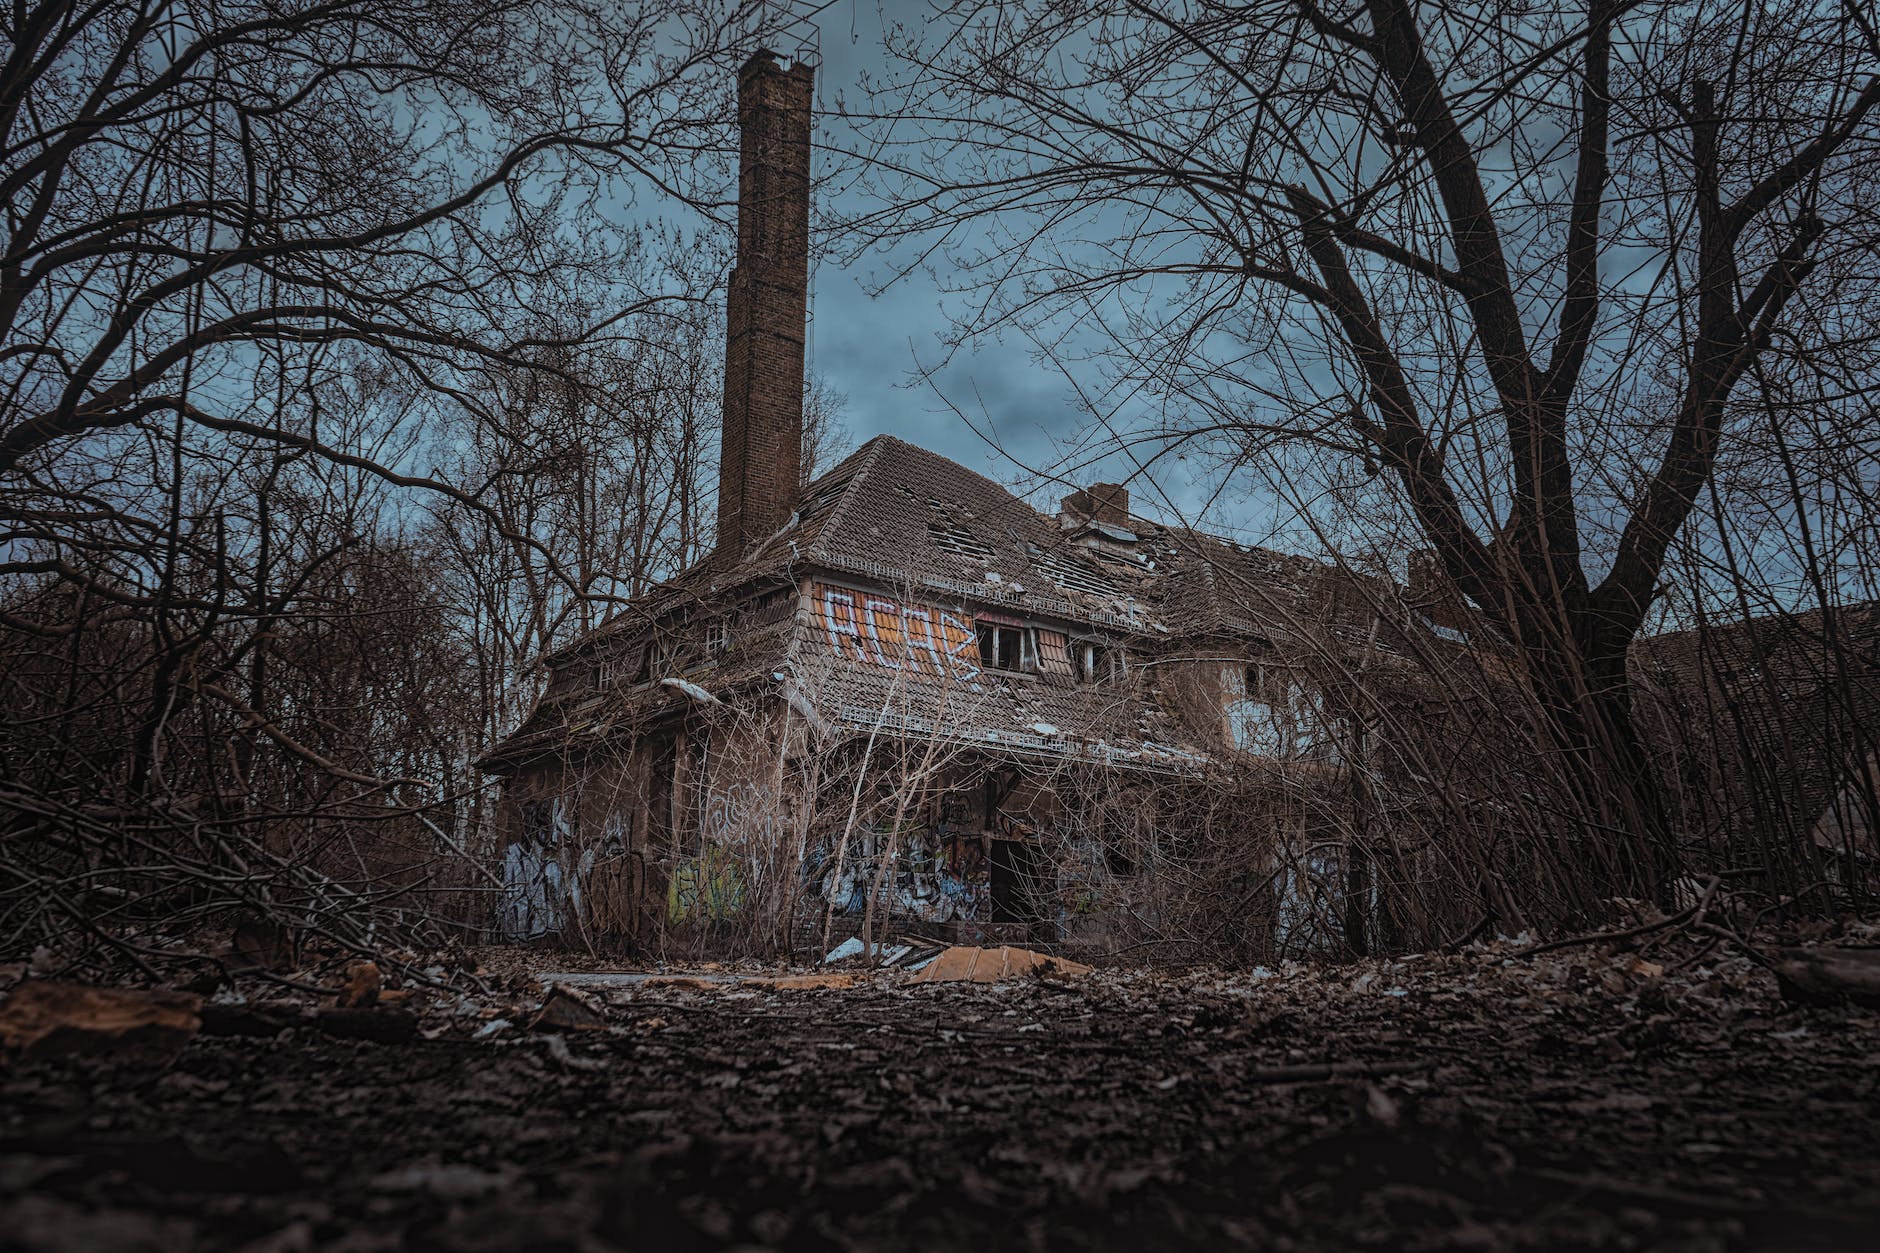 brick house in the middle of the woods under cloudy day sky | The Writer